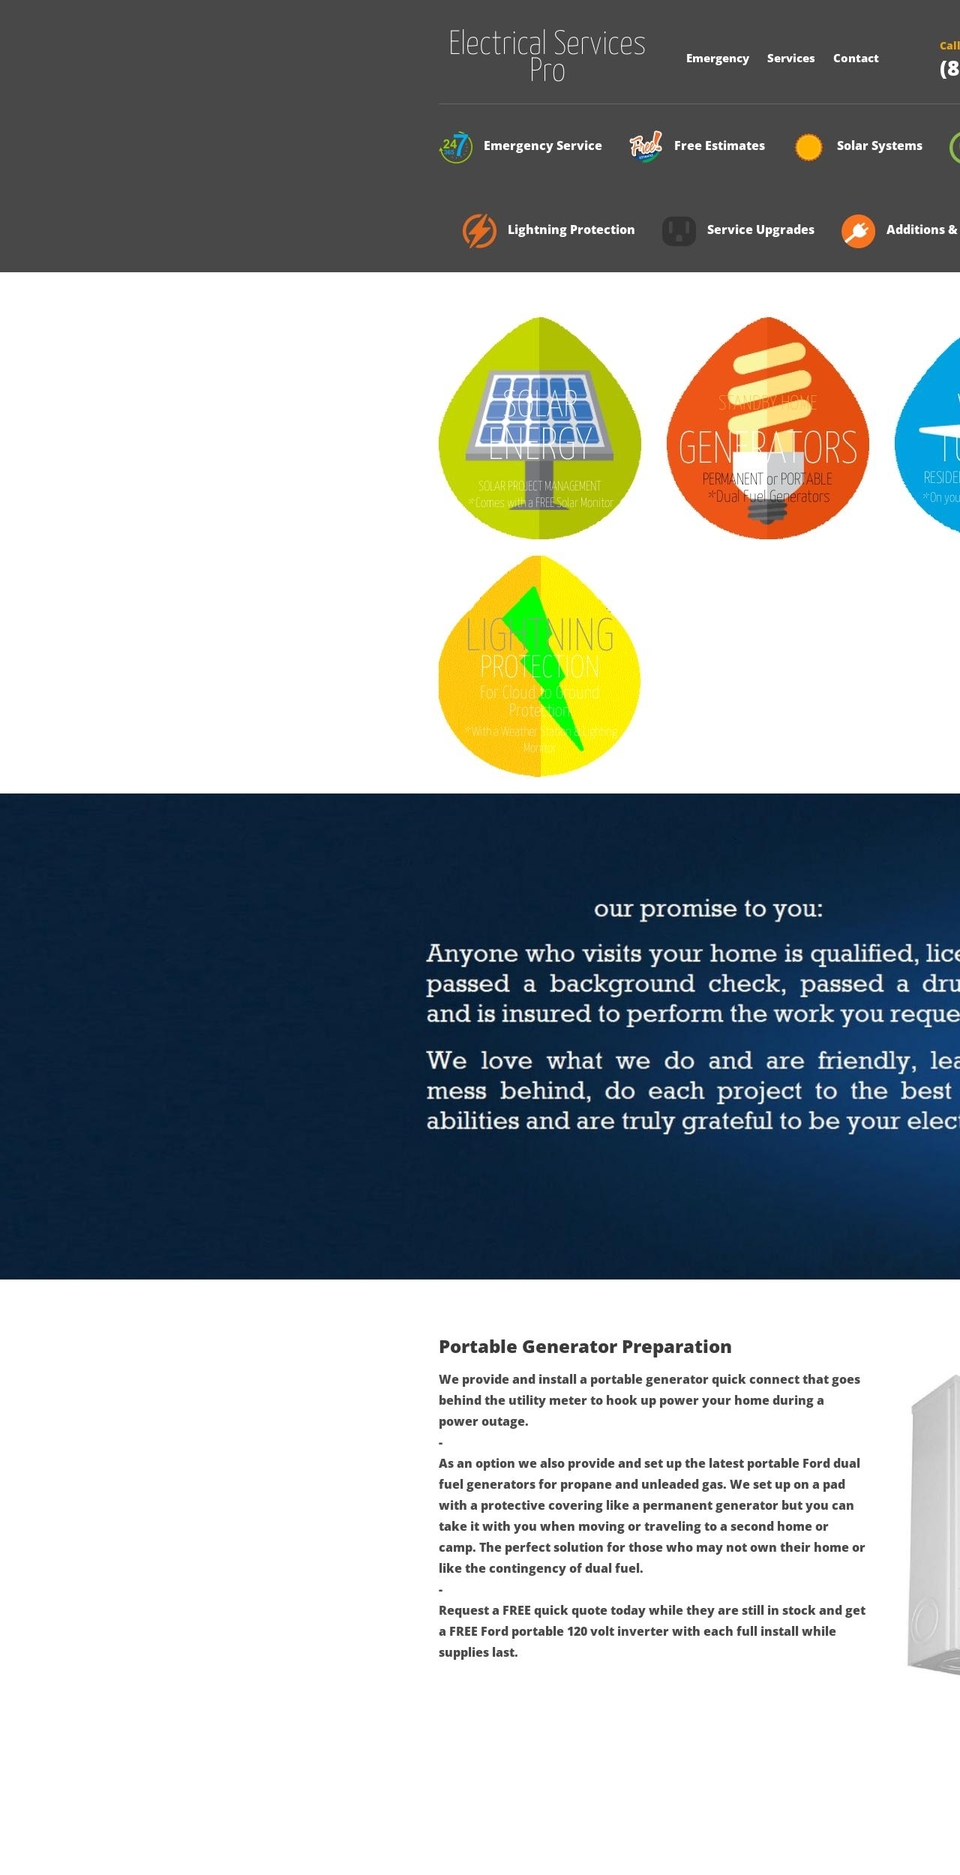 ElectricalServicesPro Shopify theme site example electricalservices.pro